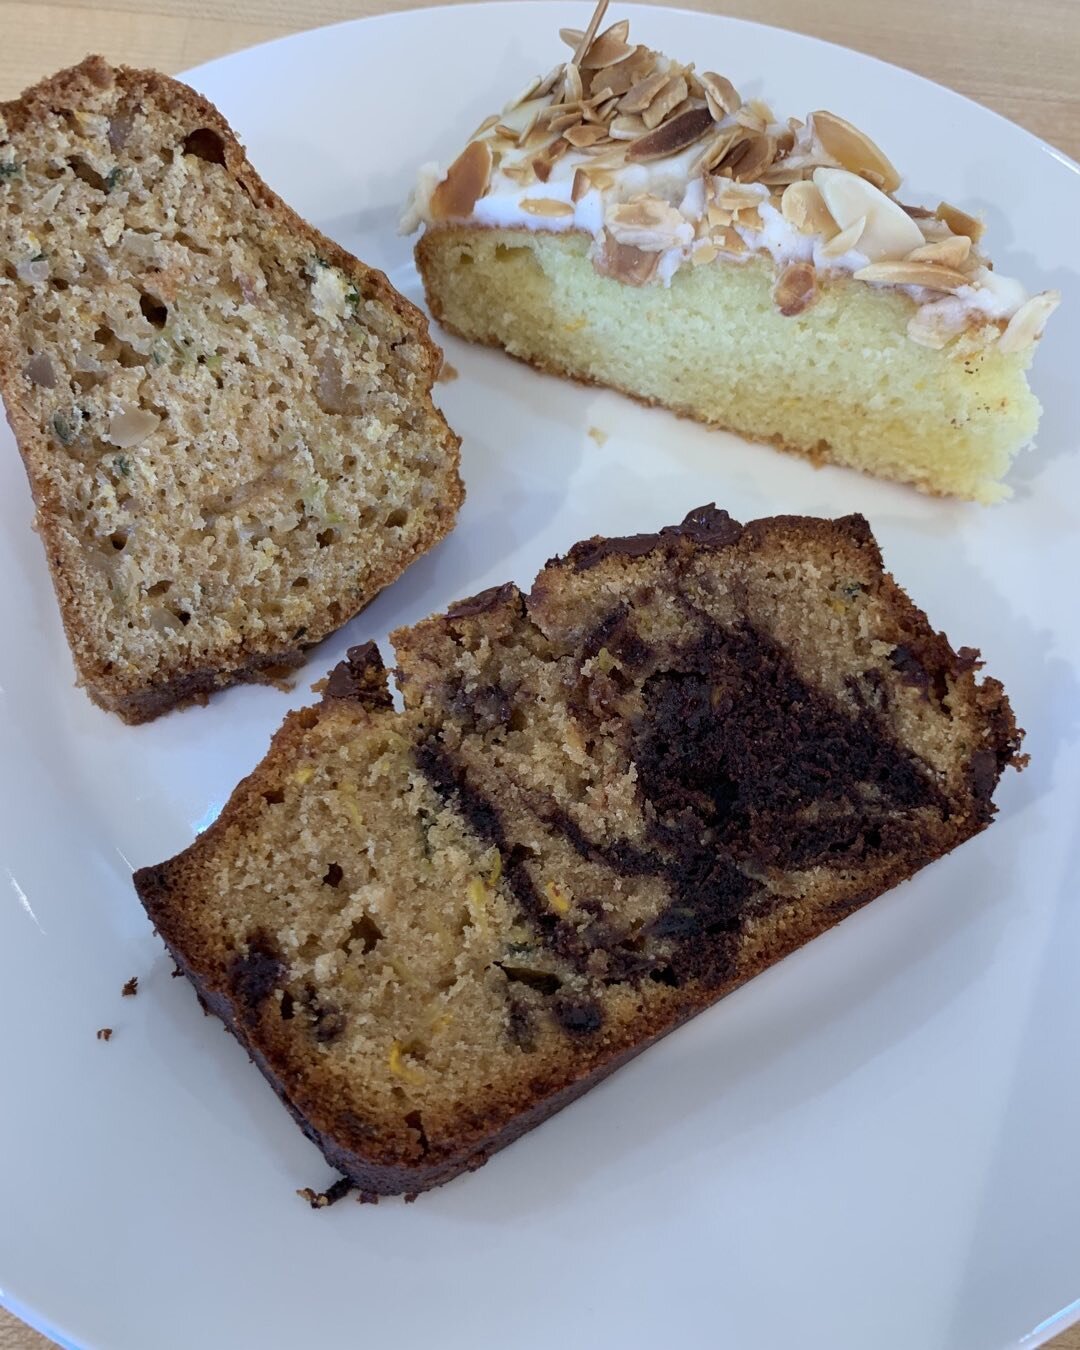 Baked goods today in the kitchen!  Chocolate peanut butter zucchini bread, citrus almond olive oil cake &amp; zucchini cake w/fresh ginger &amp; macadamia nuts.